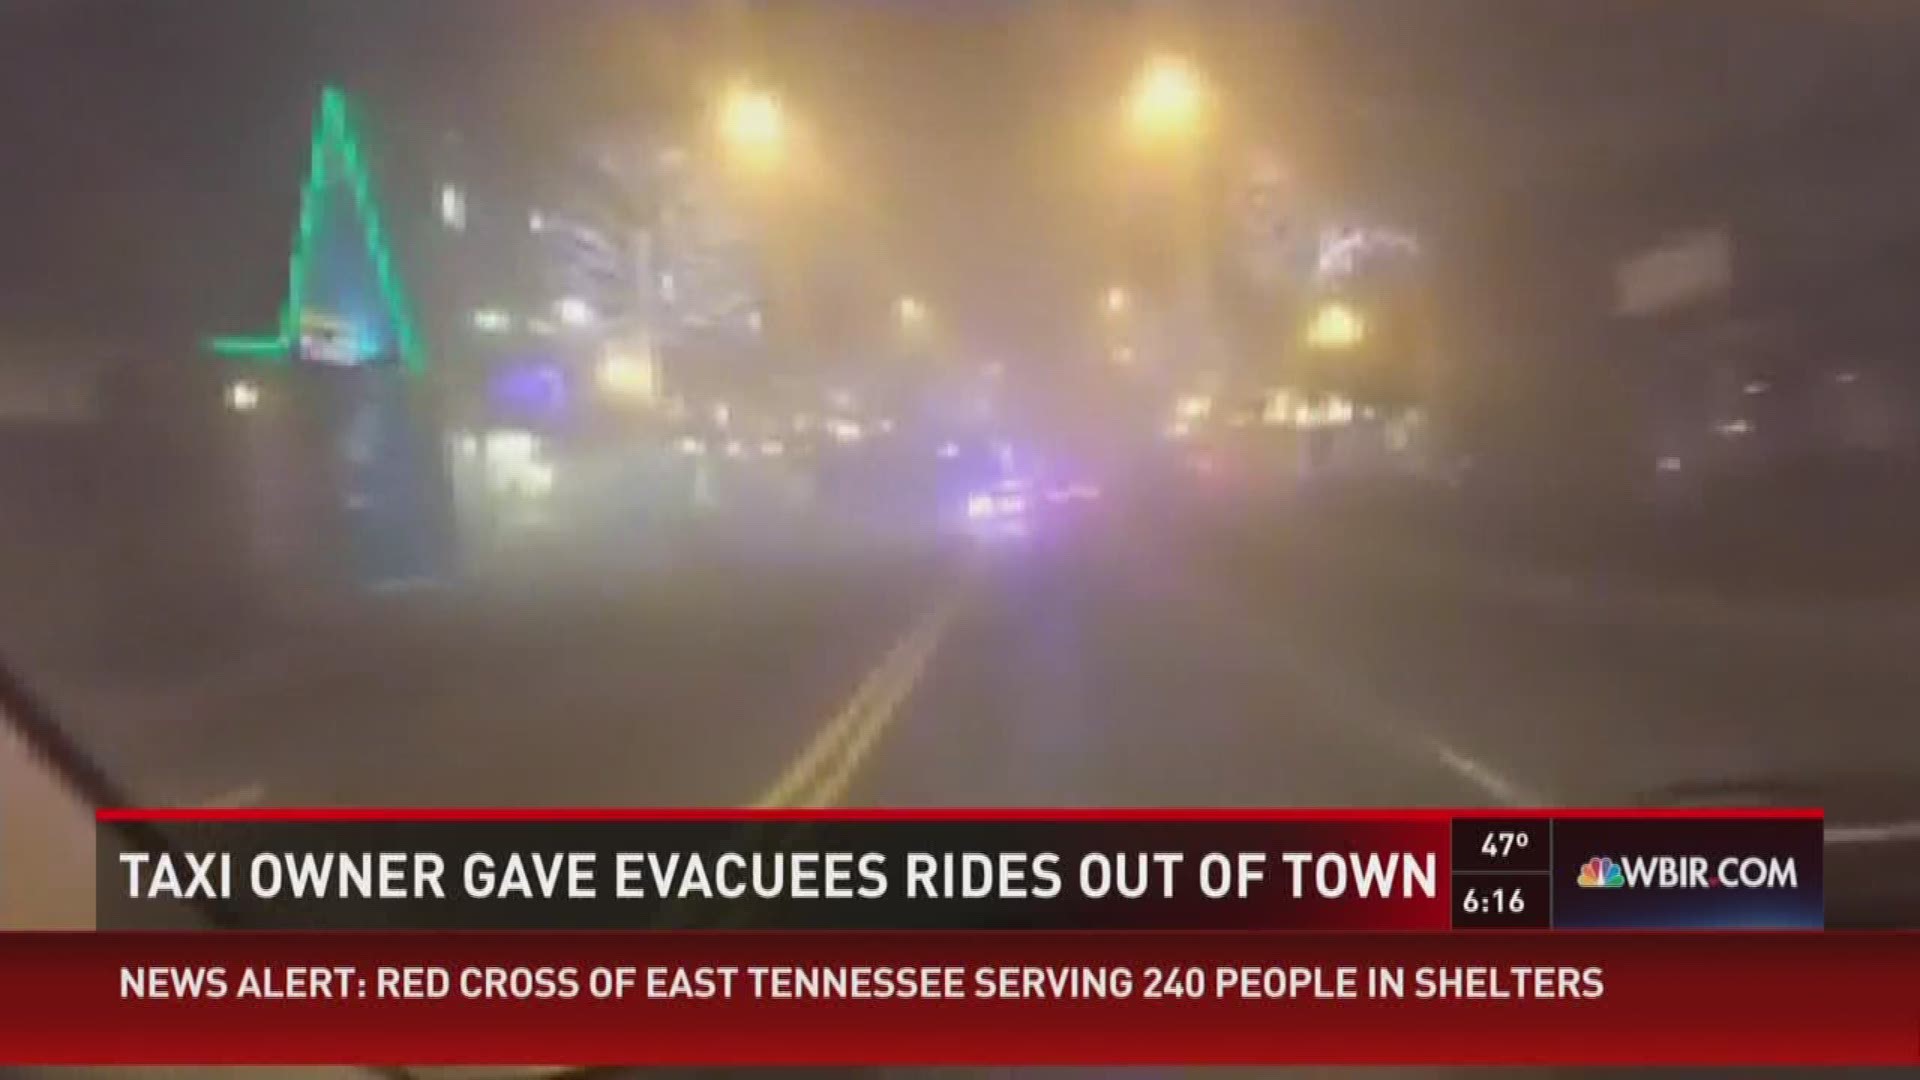 Dec. 2, 2016: As the fire spread into Gatlinburg Monday night, a local taxi service owner took to the streets giving out free rides to anyone who needed an escape route.